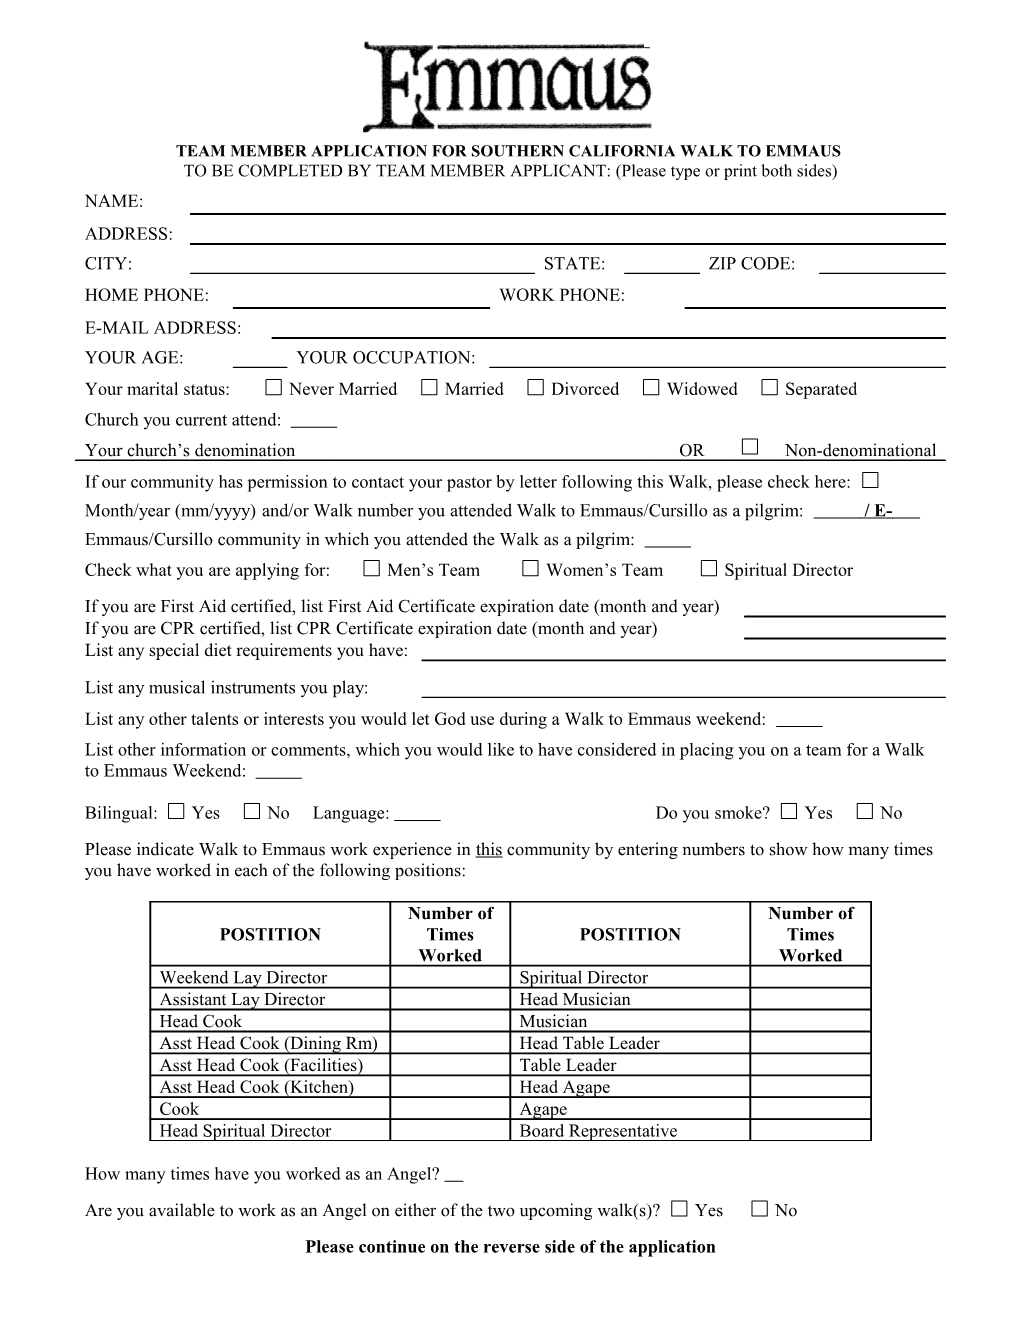 Team Member Application for Southern California Walk to Emmaus